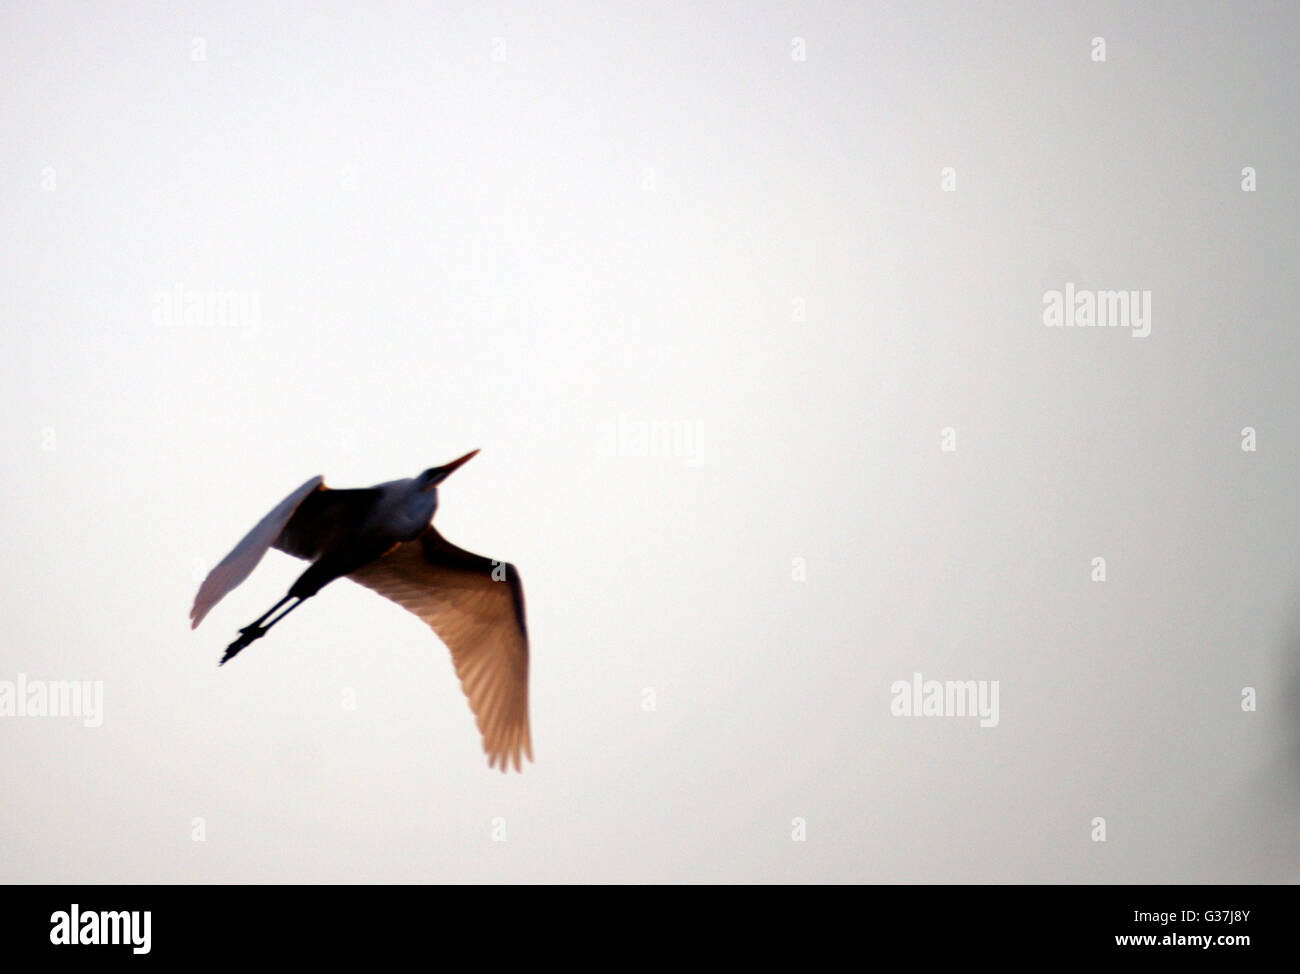 A bird seen flying over a beach in the afternoon Stock Photo